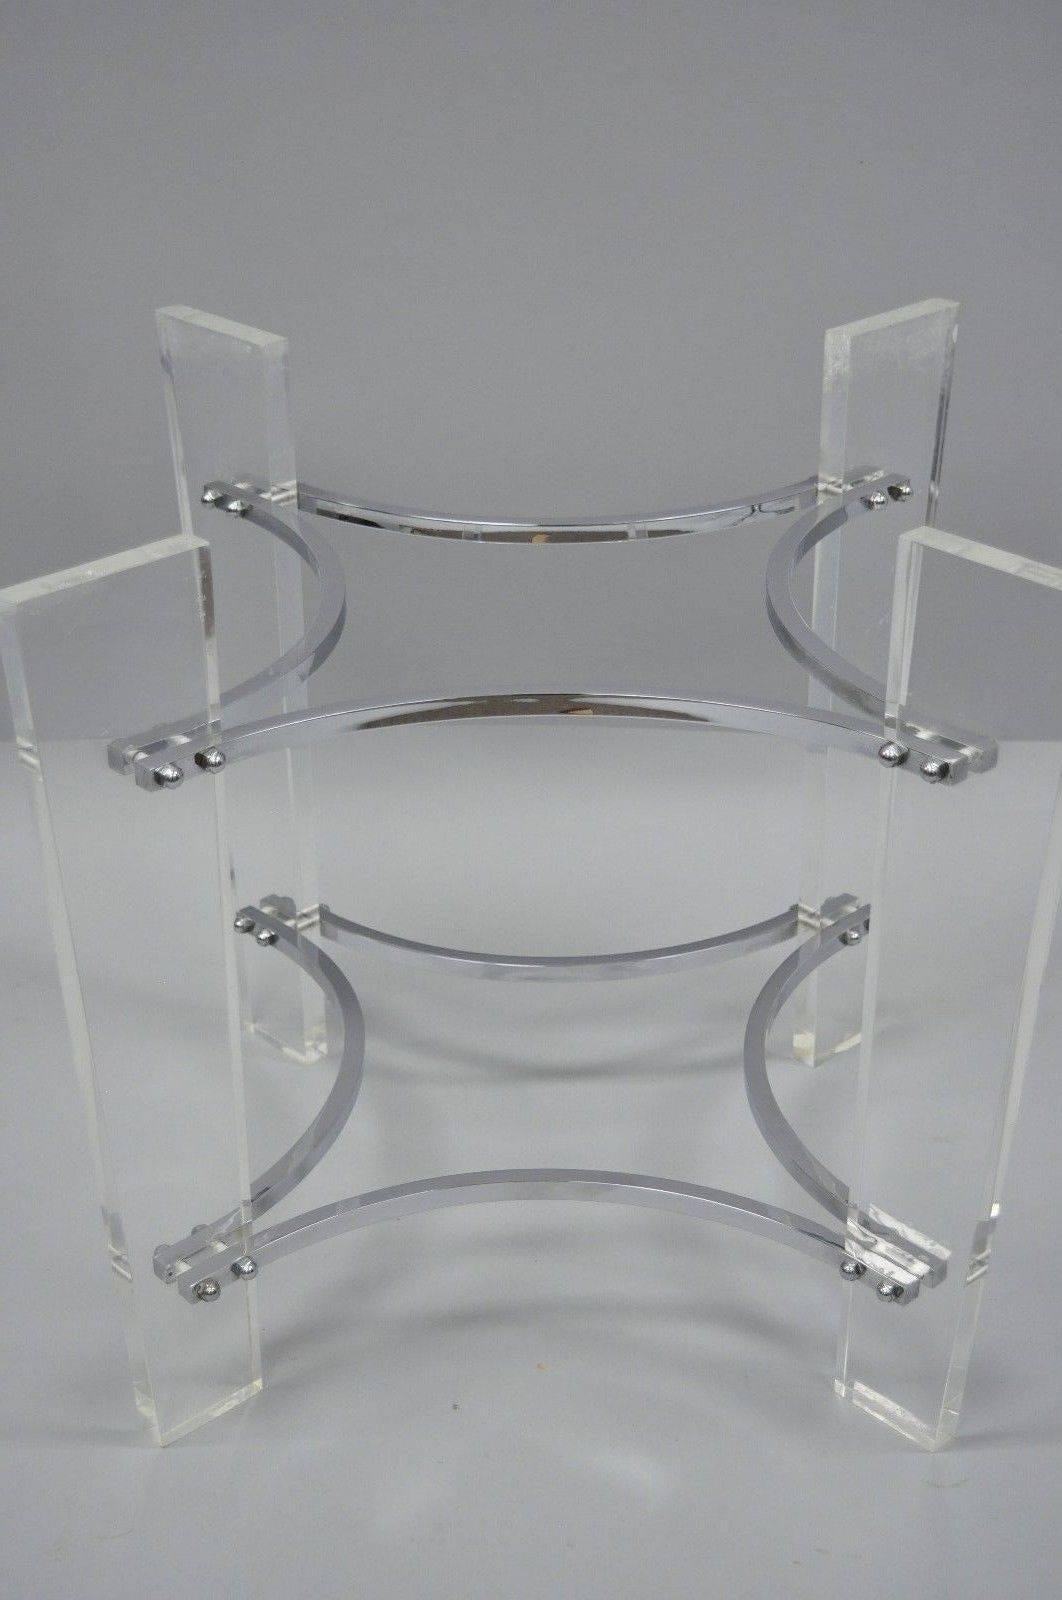 Pair of Lucite & Chrome Sculptural Mid-Century Modern End Table Bases In Good Condition For Sale In Philadelphia, PA